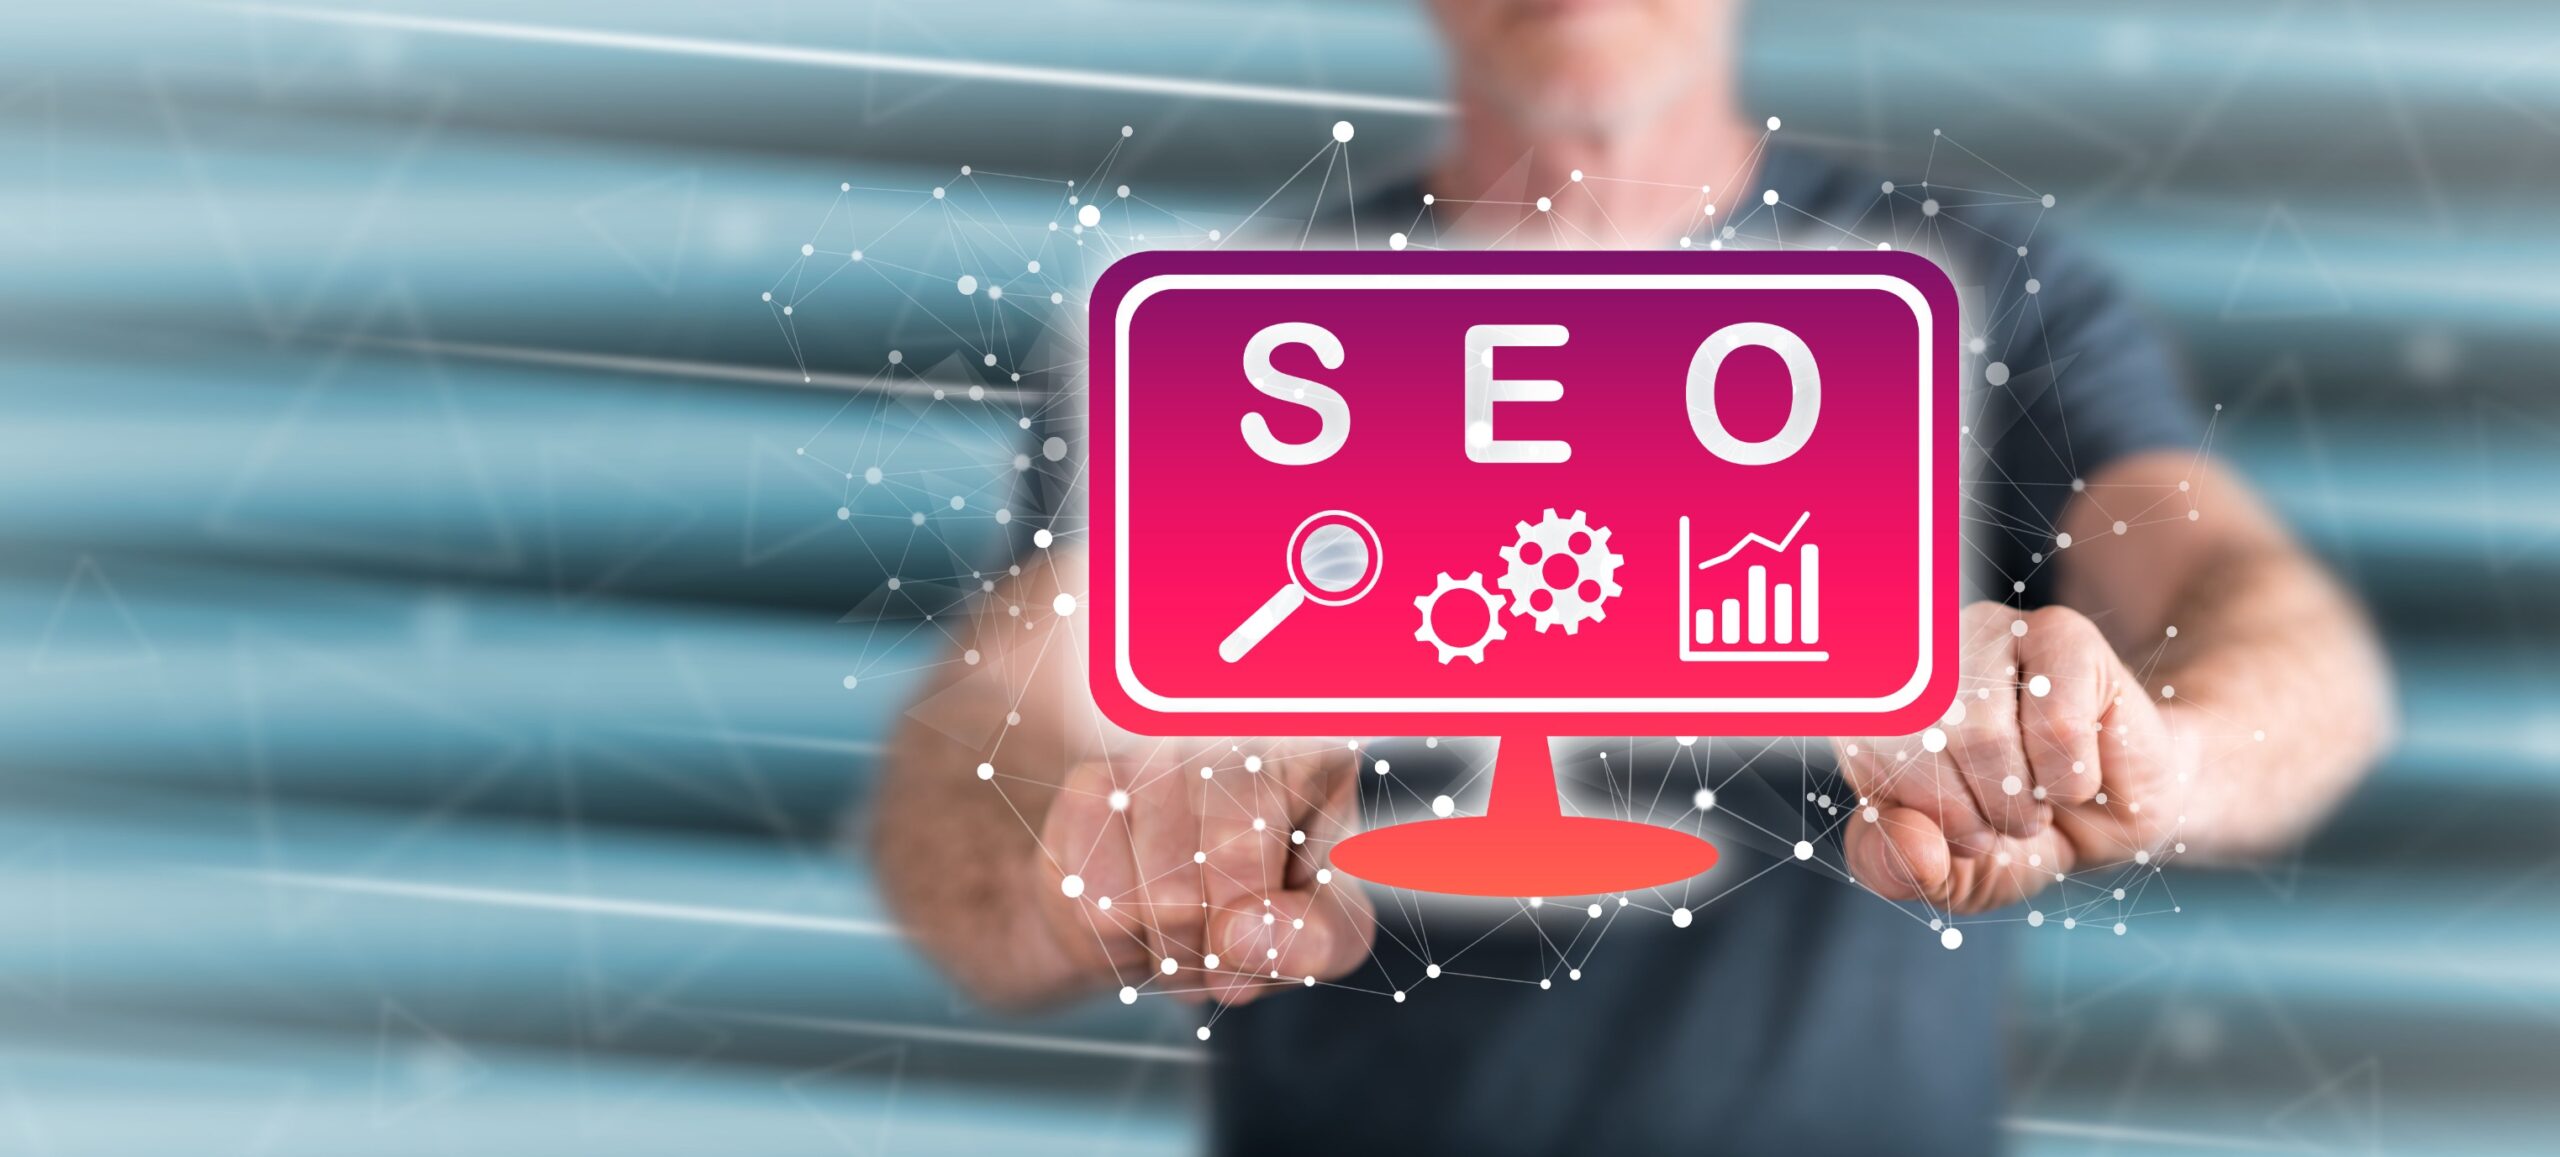 SEO Mistakes and How to Fix Them